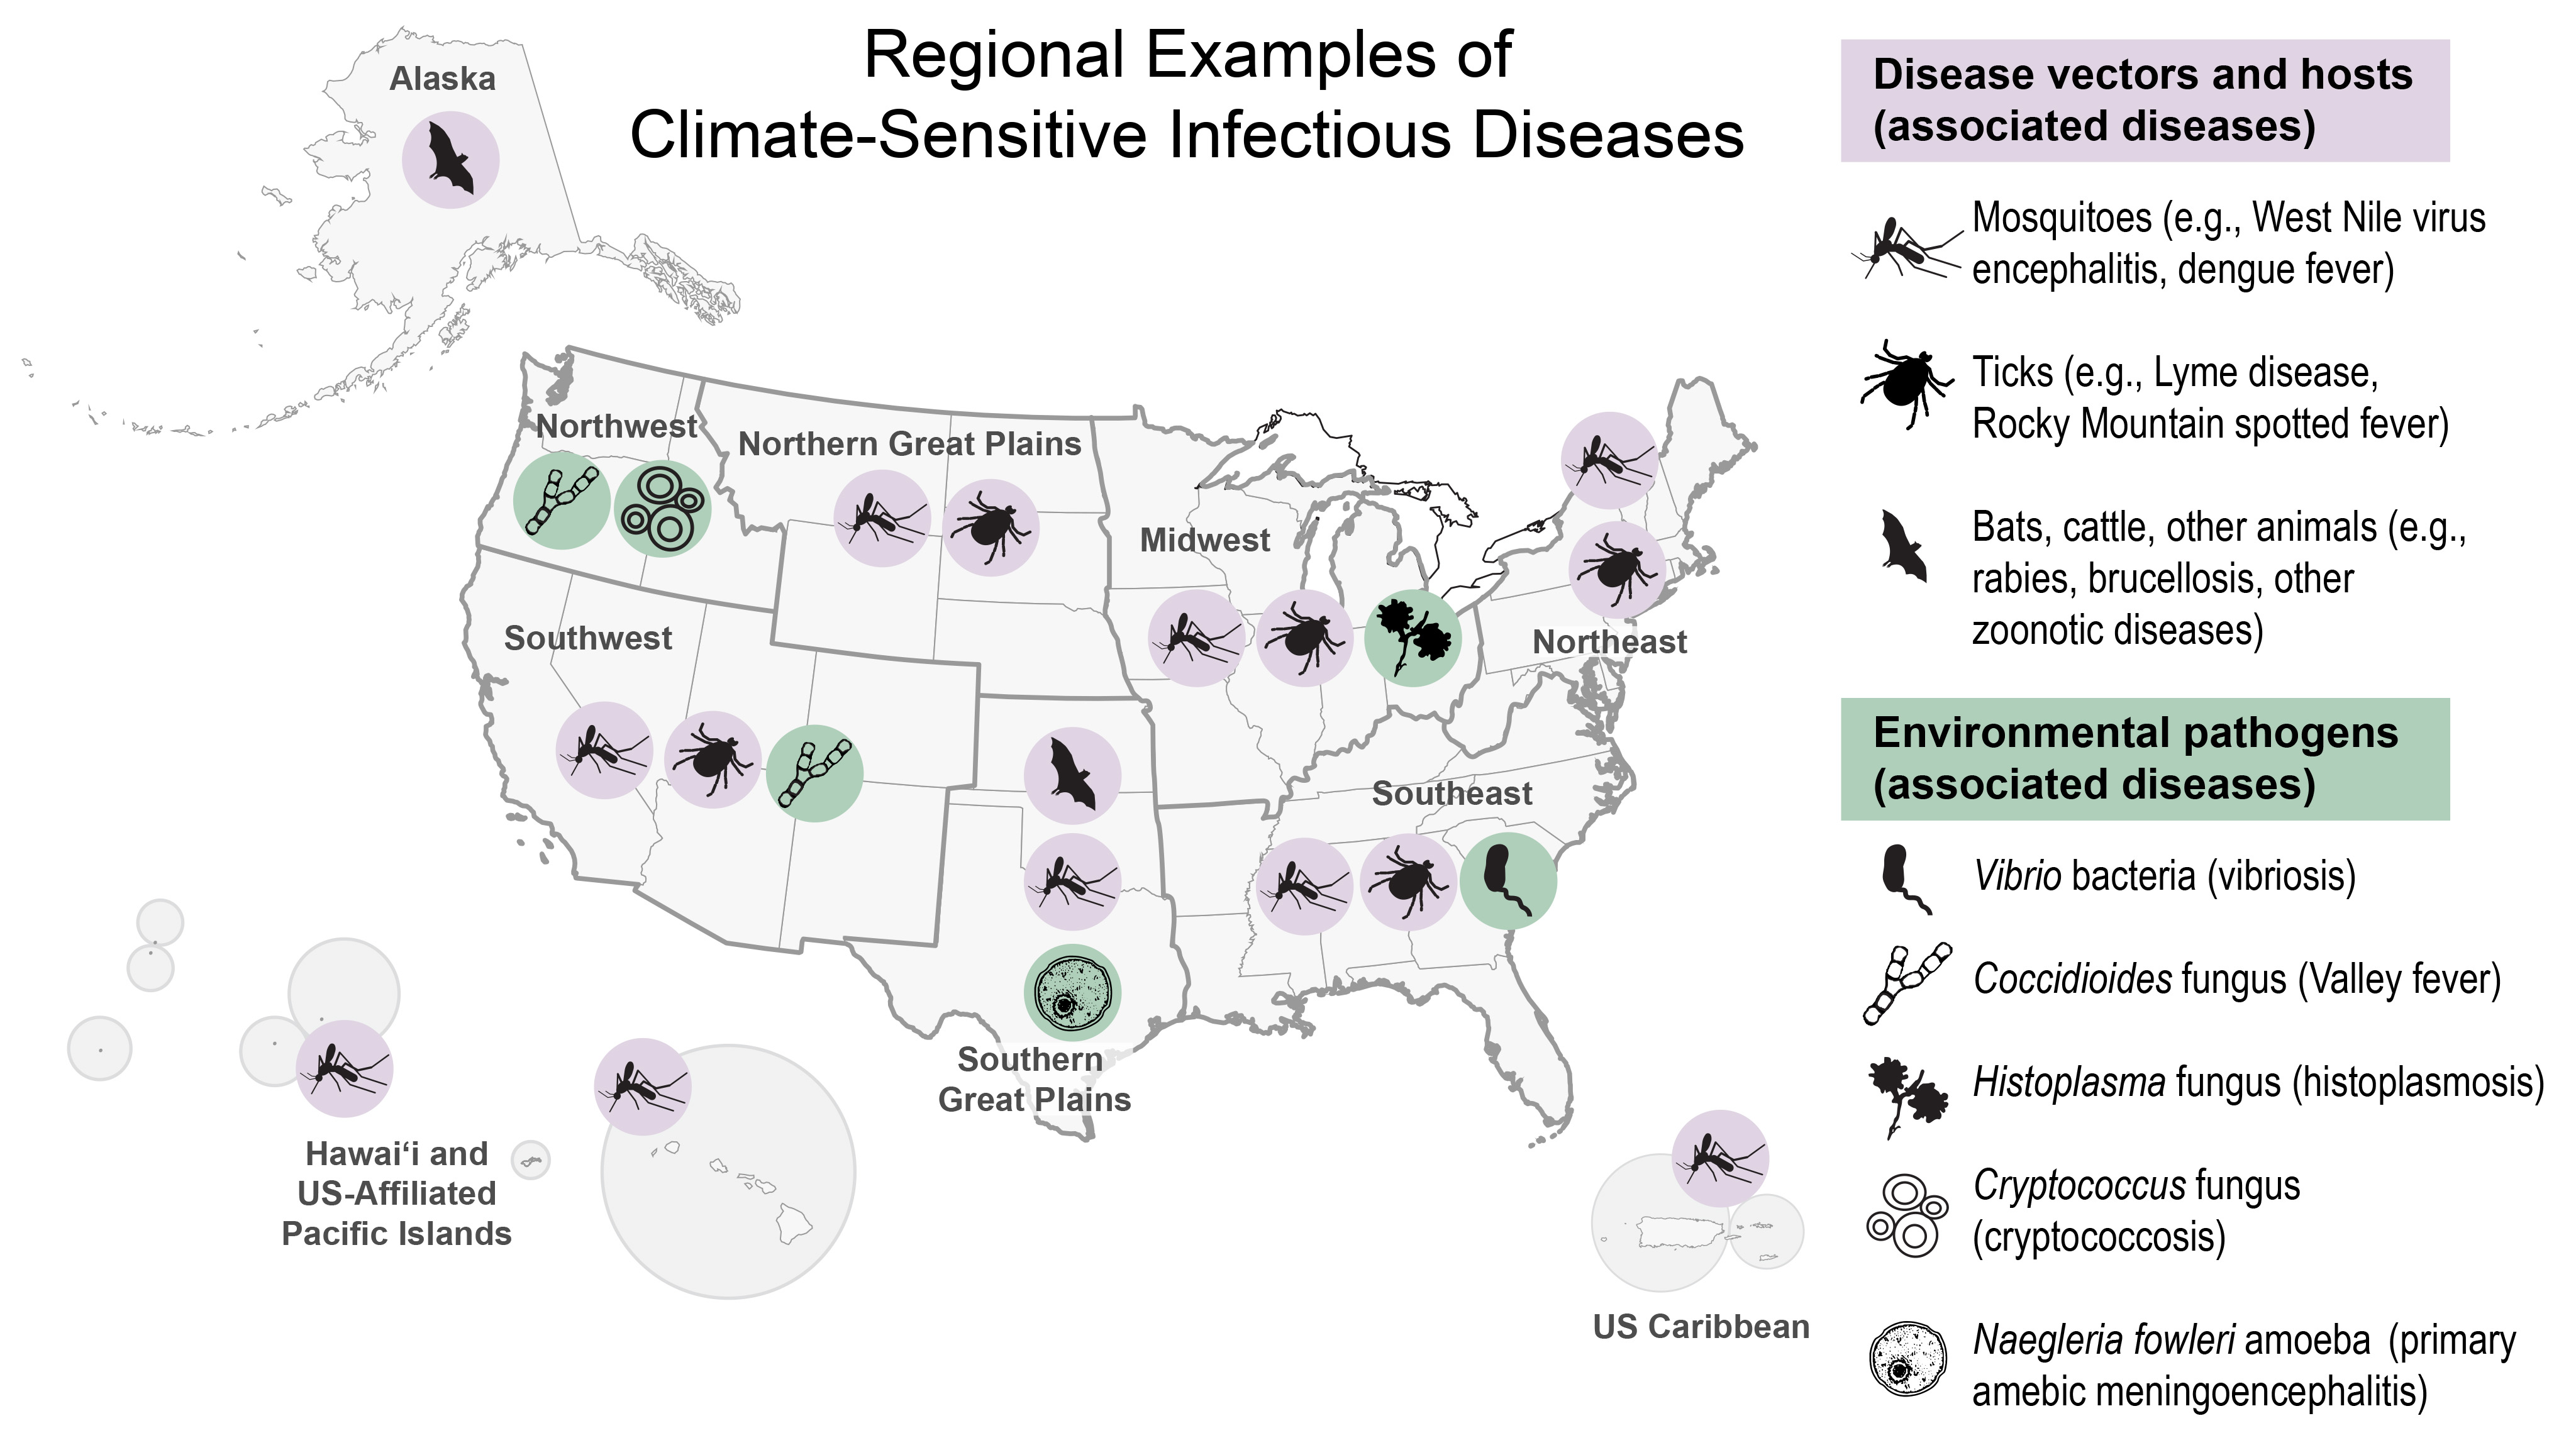 Regional Examples of Climate-Sensitive Infectious Diseases